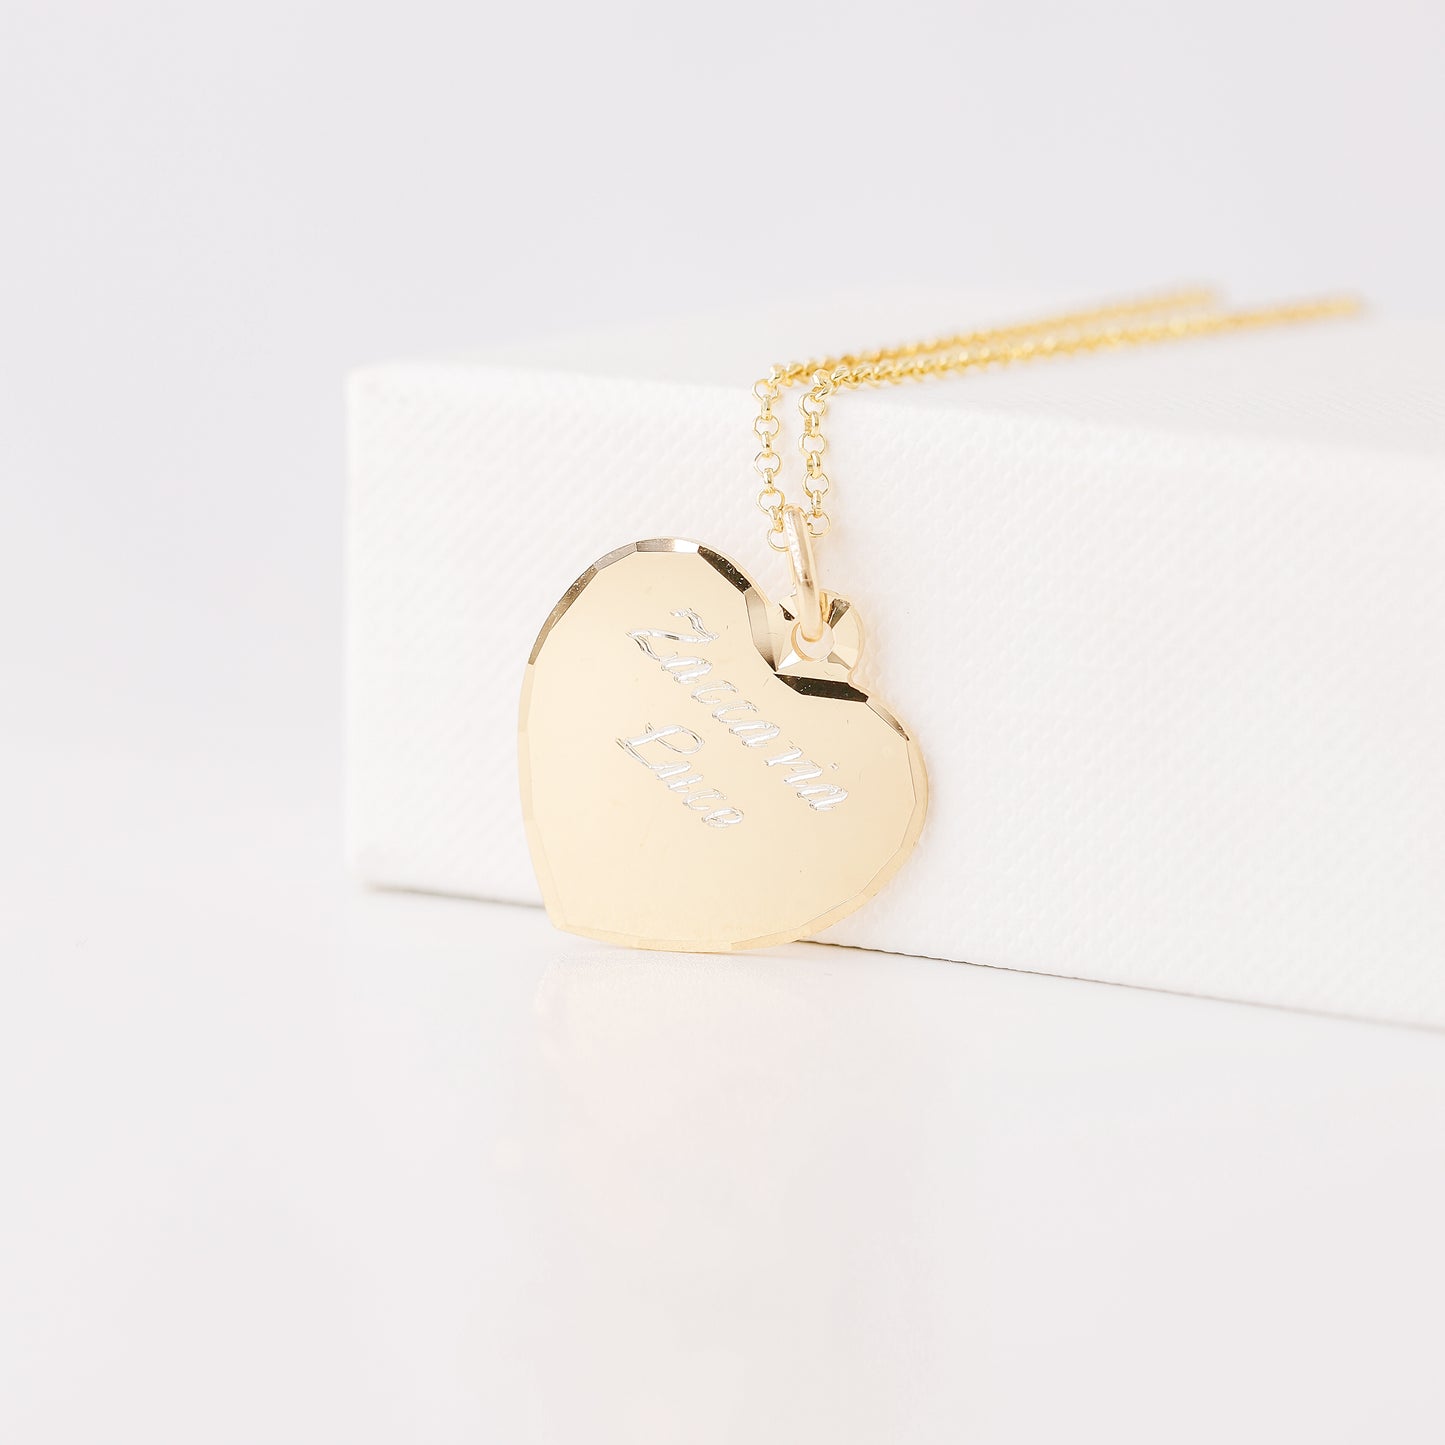 Gold Heart Necklace, Heart Name Necklace, Love Necklace, Minimalist Heart Necklace, Mothers Day Gift, Lover Gift BYSDMJEWELS